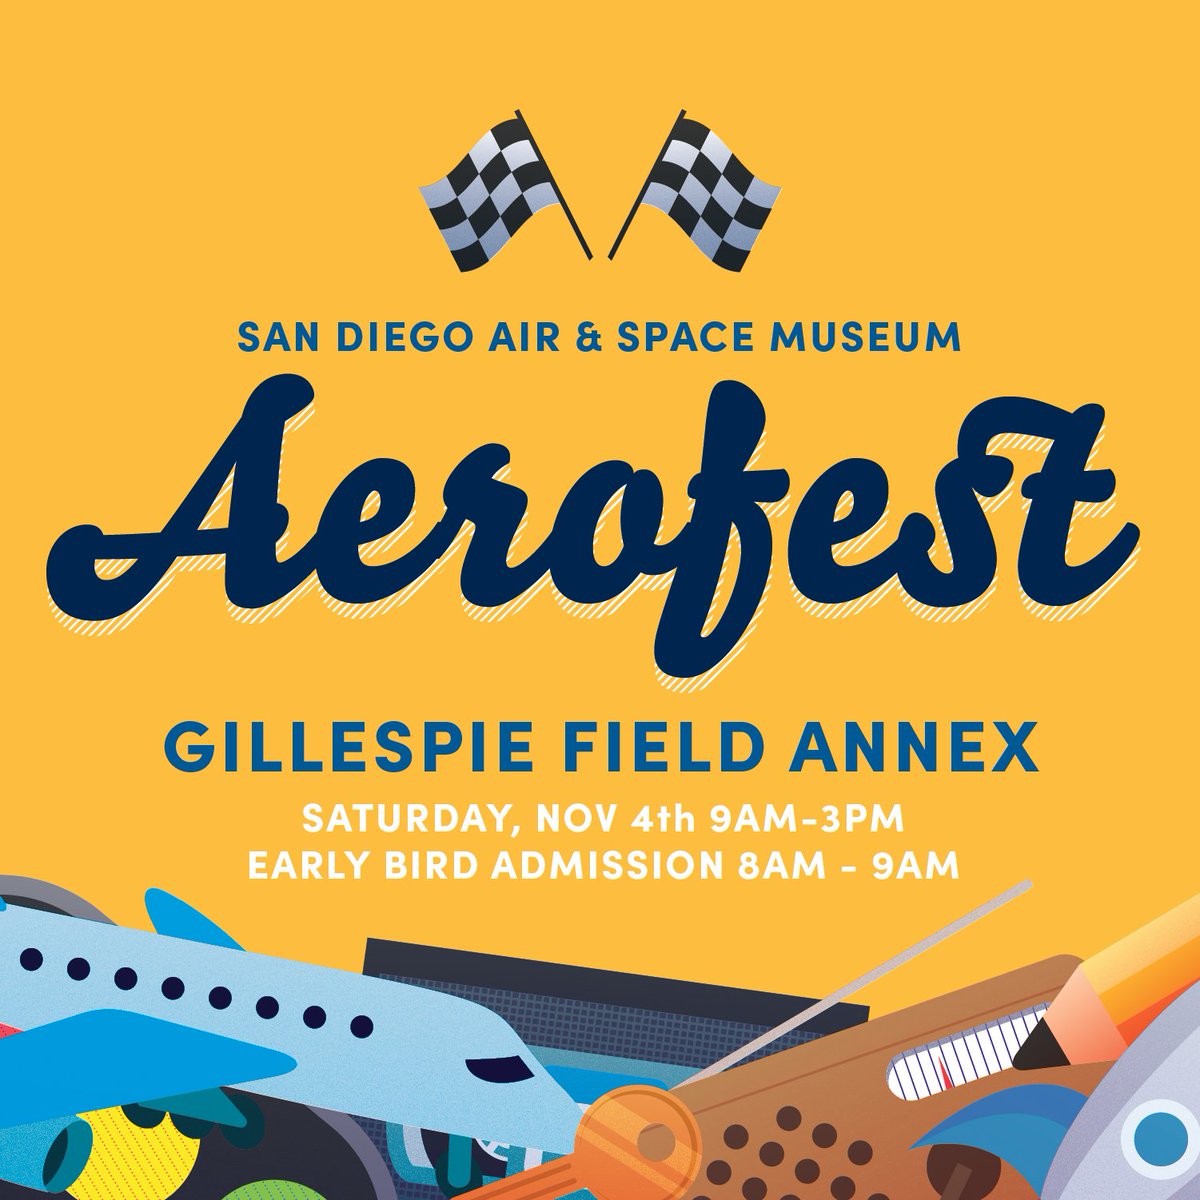 Exciting news! Aerofest is finally here! Join us today for an extraordinary day filled with aviation marvels, open hangar explorations, and fantastic museum sales at our Gillespie Field Annex.